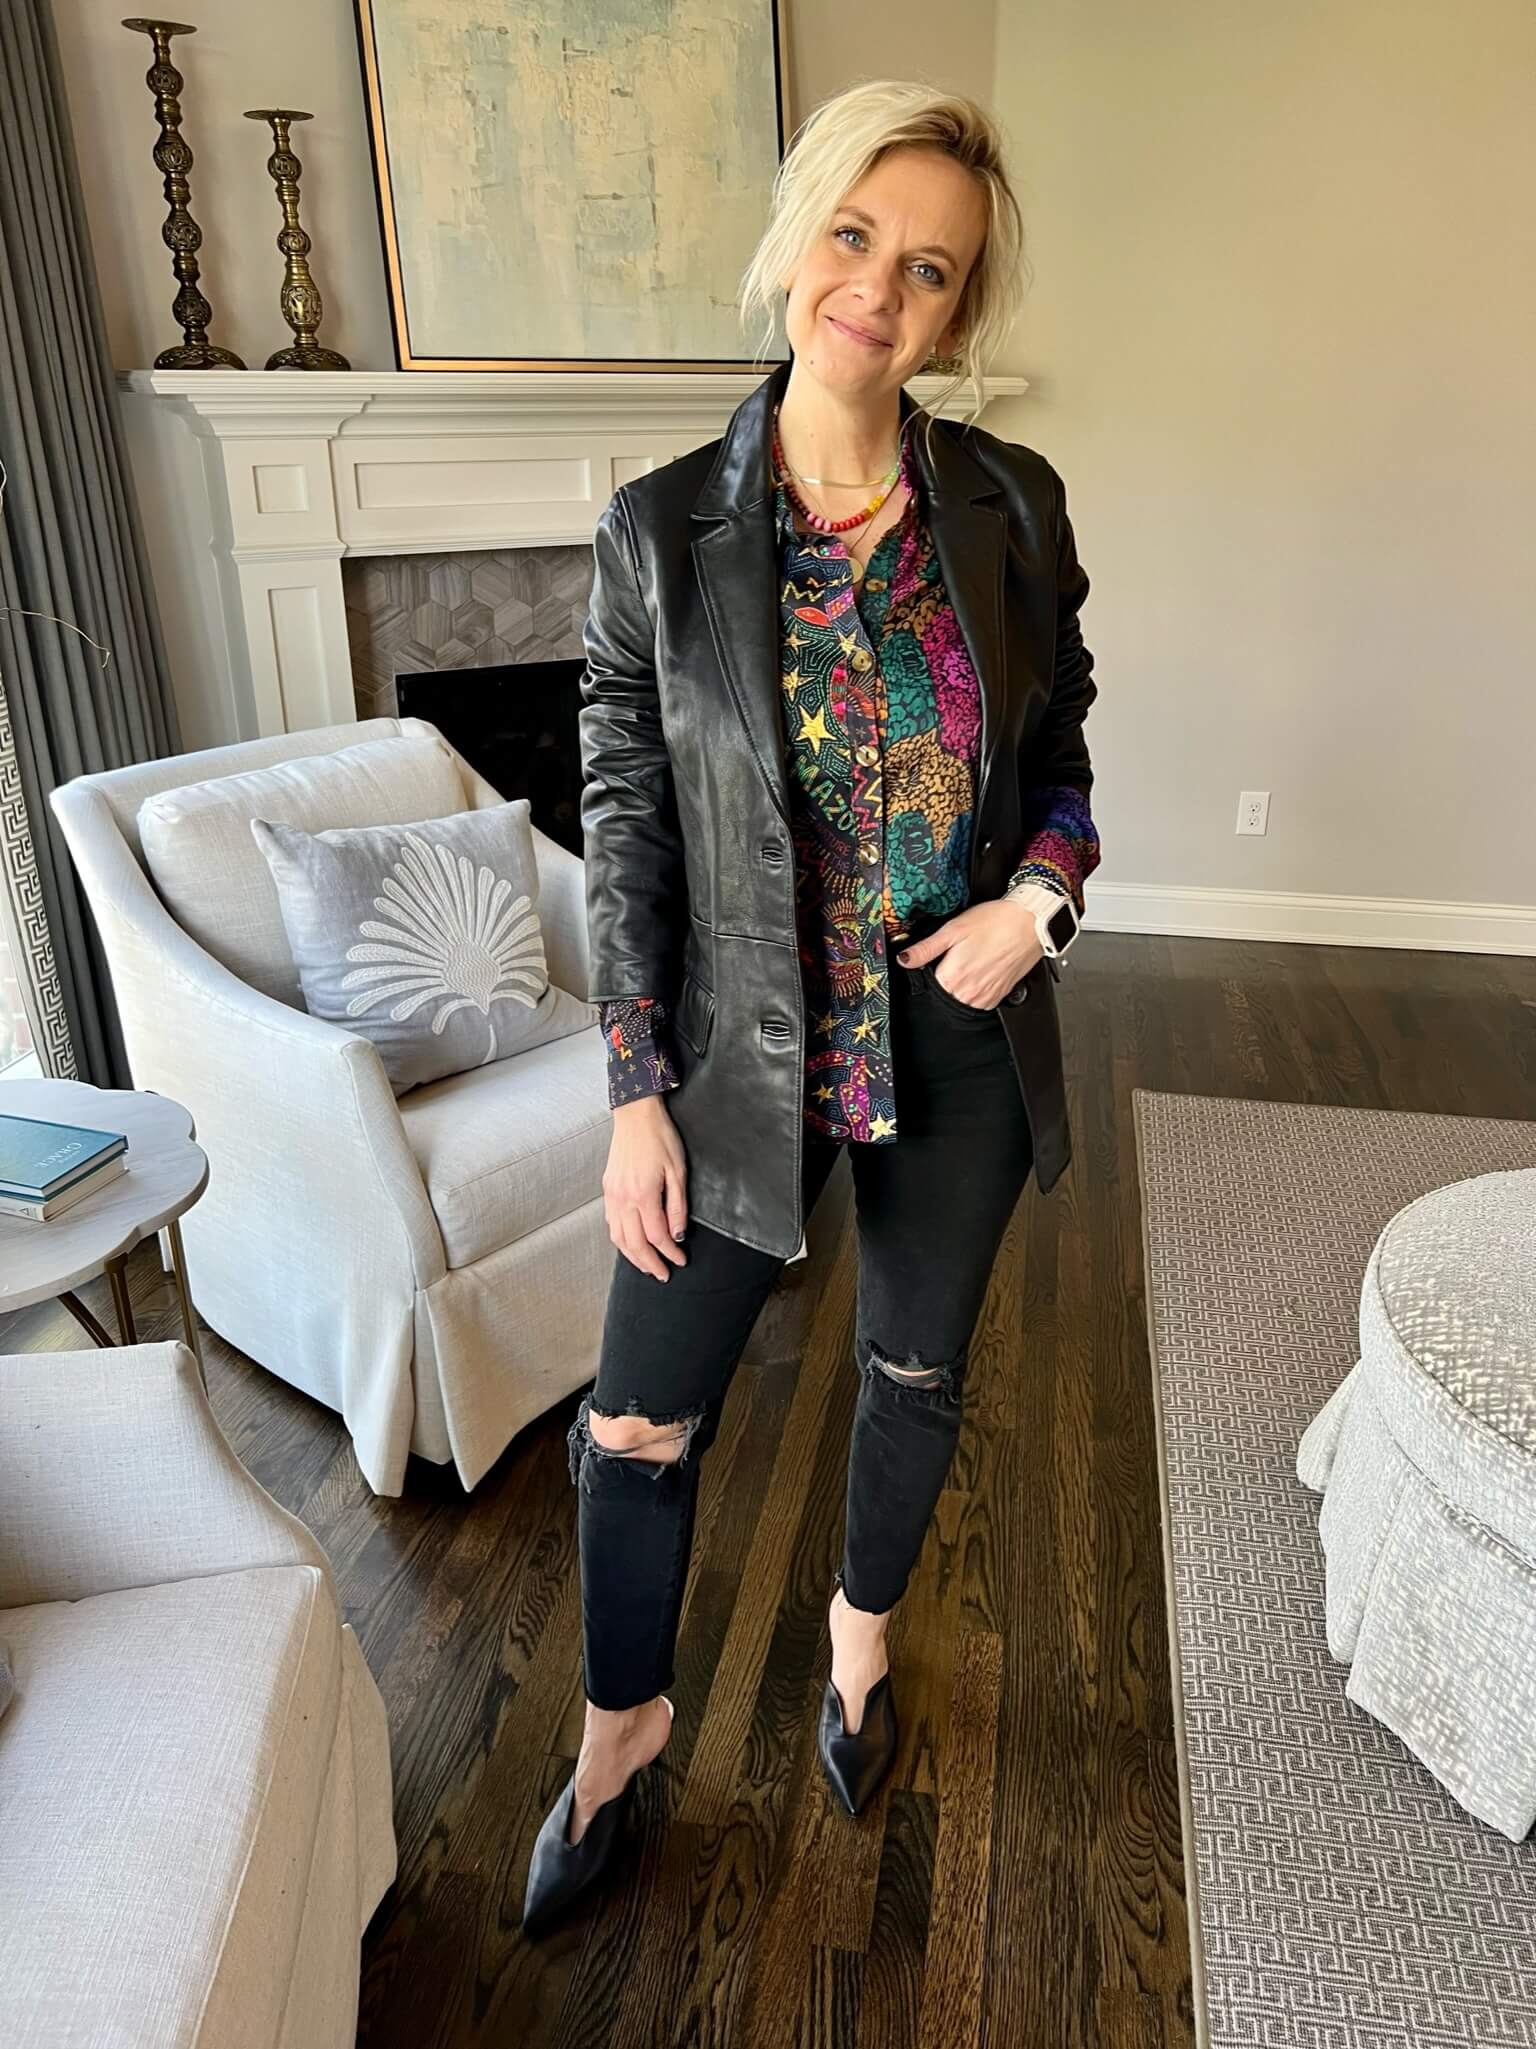 How To Wear Our Winter Capsule Wardrobe - Part 2 Leather Blazer & Printed Blouse & Black Jeans & Black Mule